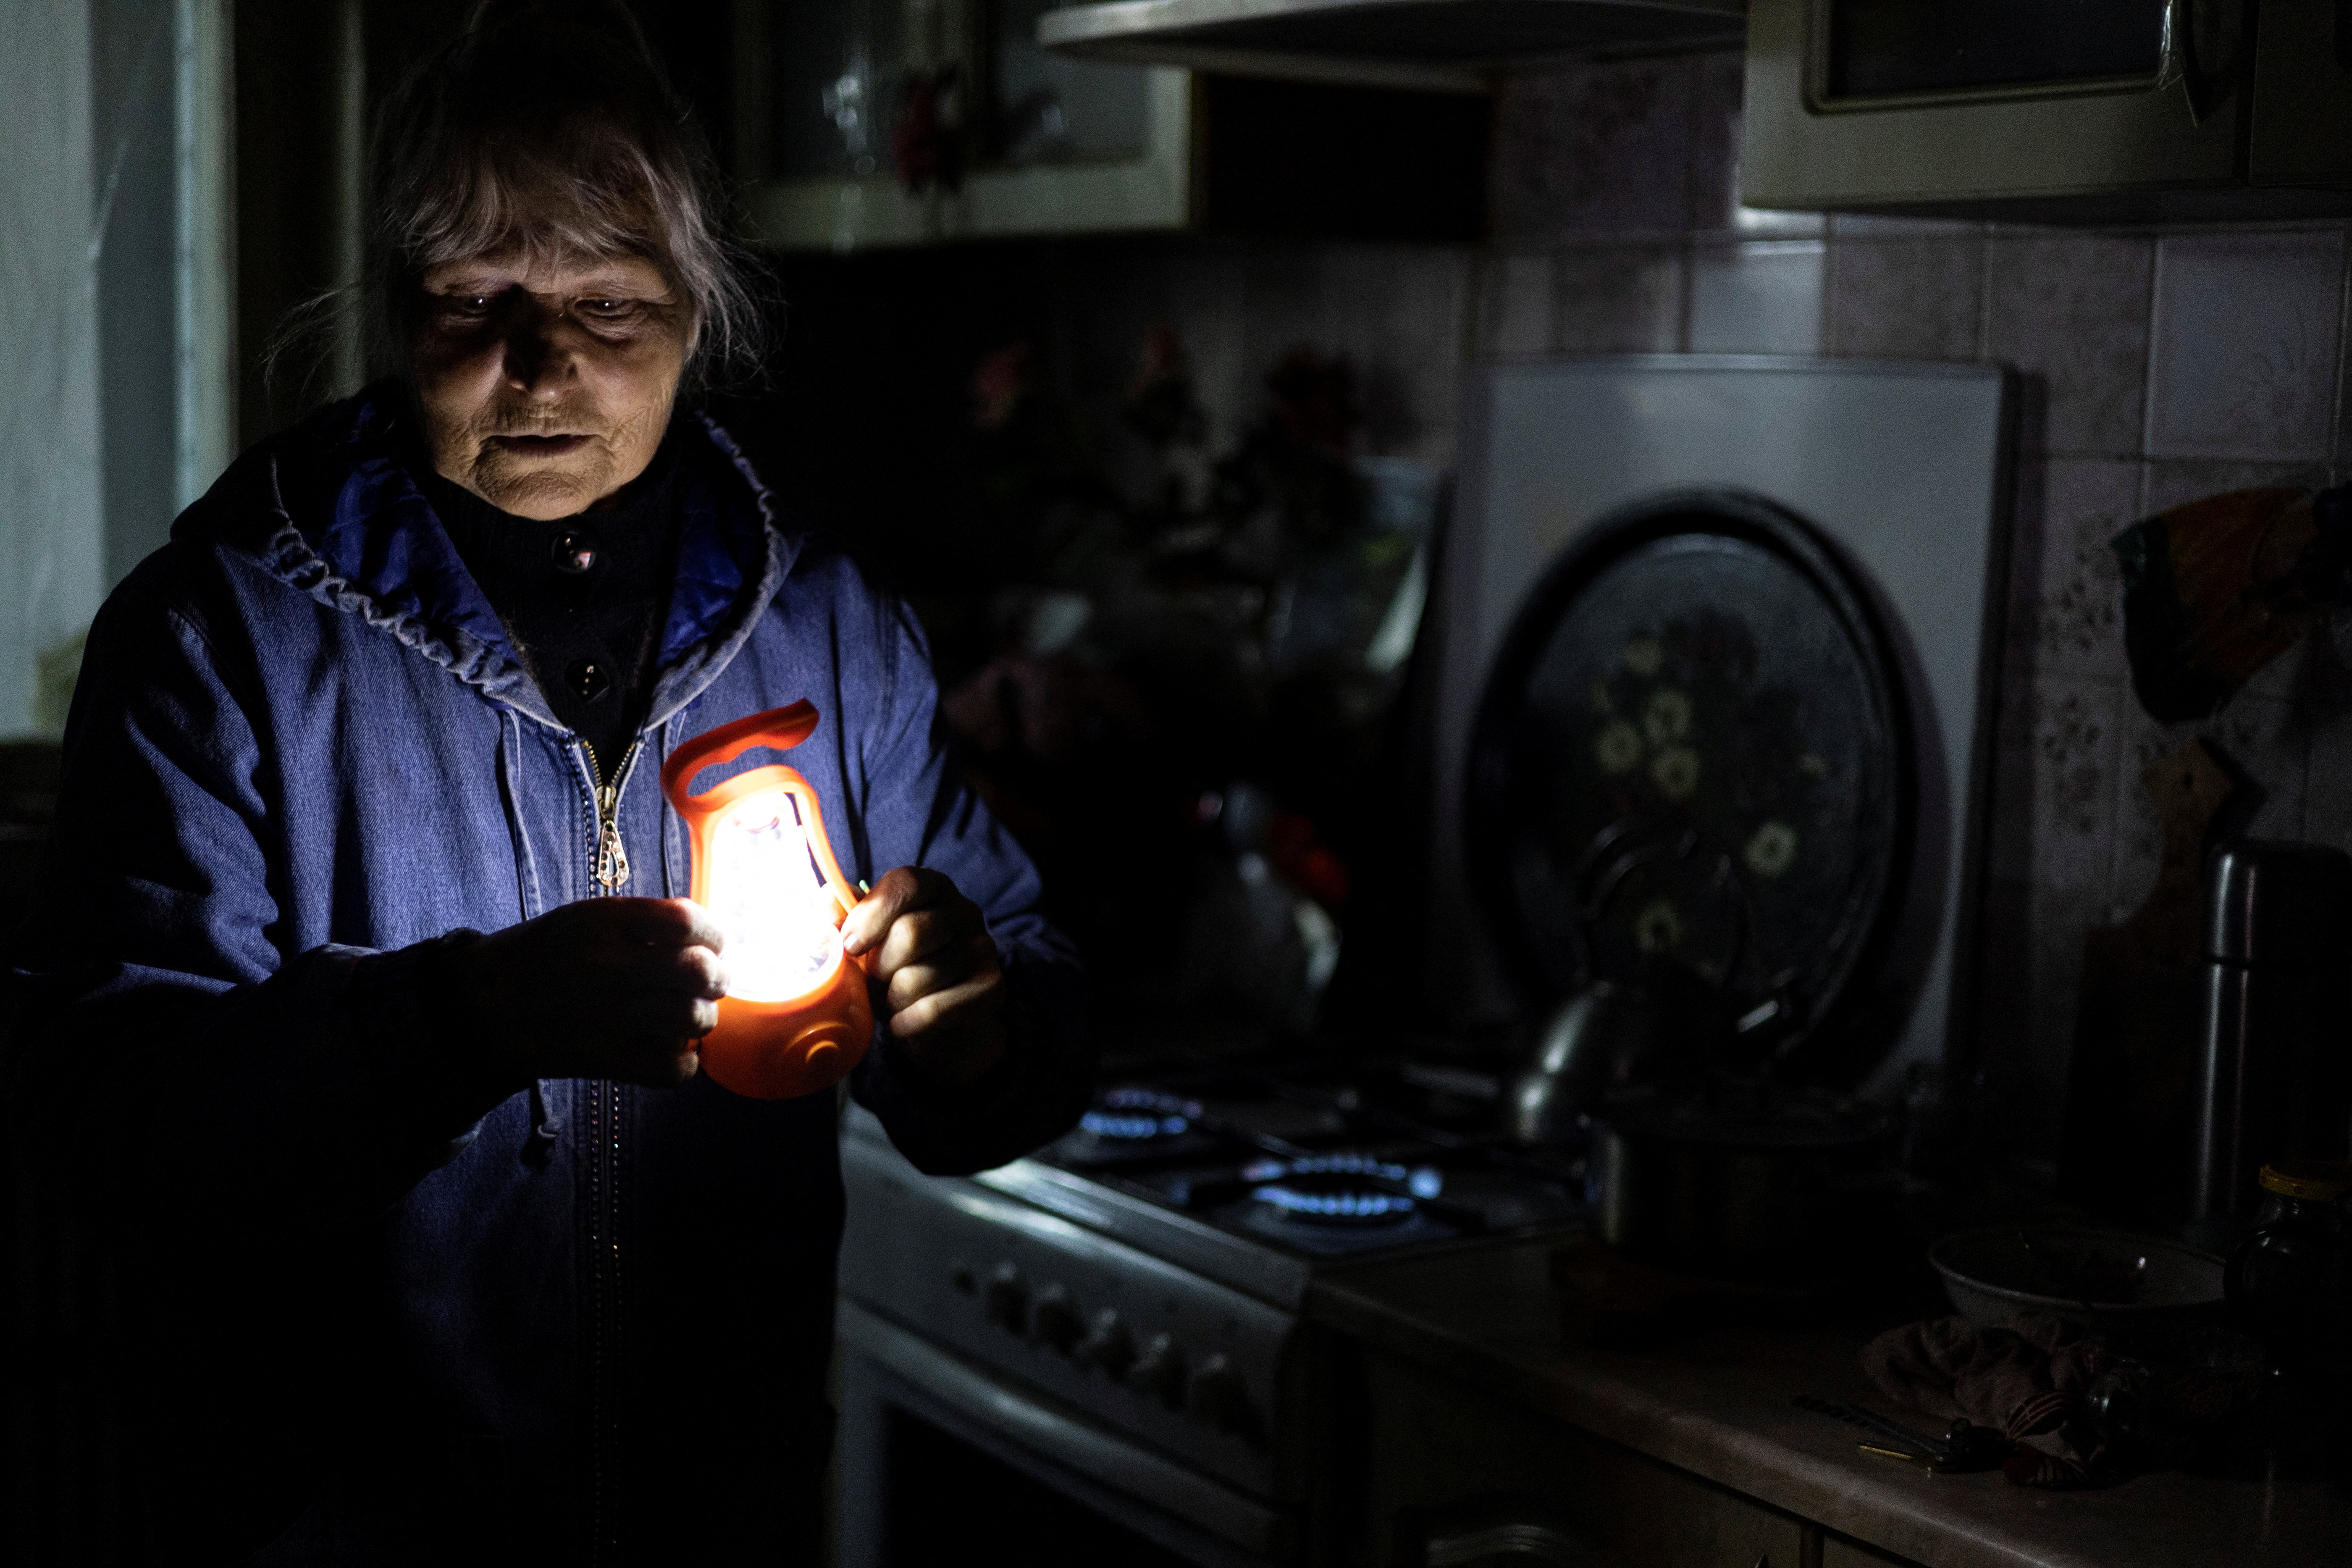 Olga Kobzar stands in her kitchen as she shows how she heats her house by gas stove cooktop, as Russia's attack on Ukraine continues, in her apartment in Saltivka neighbourhood of Kharkiv, Ukraine, September 22, 2022. REUTERS/Umit Bektas